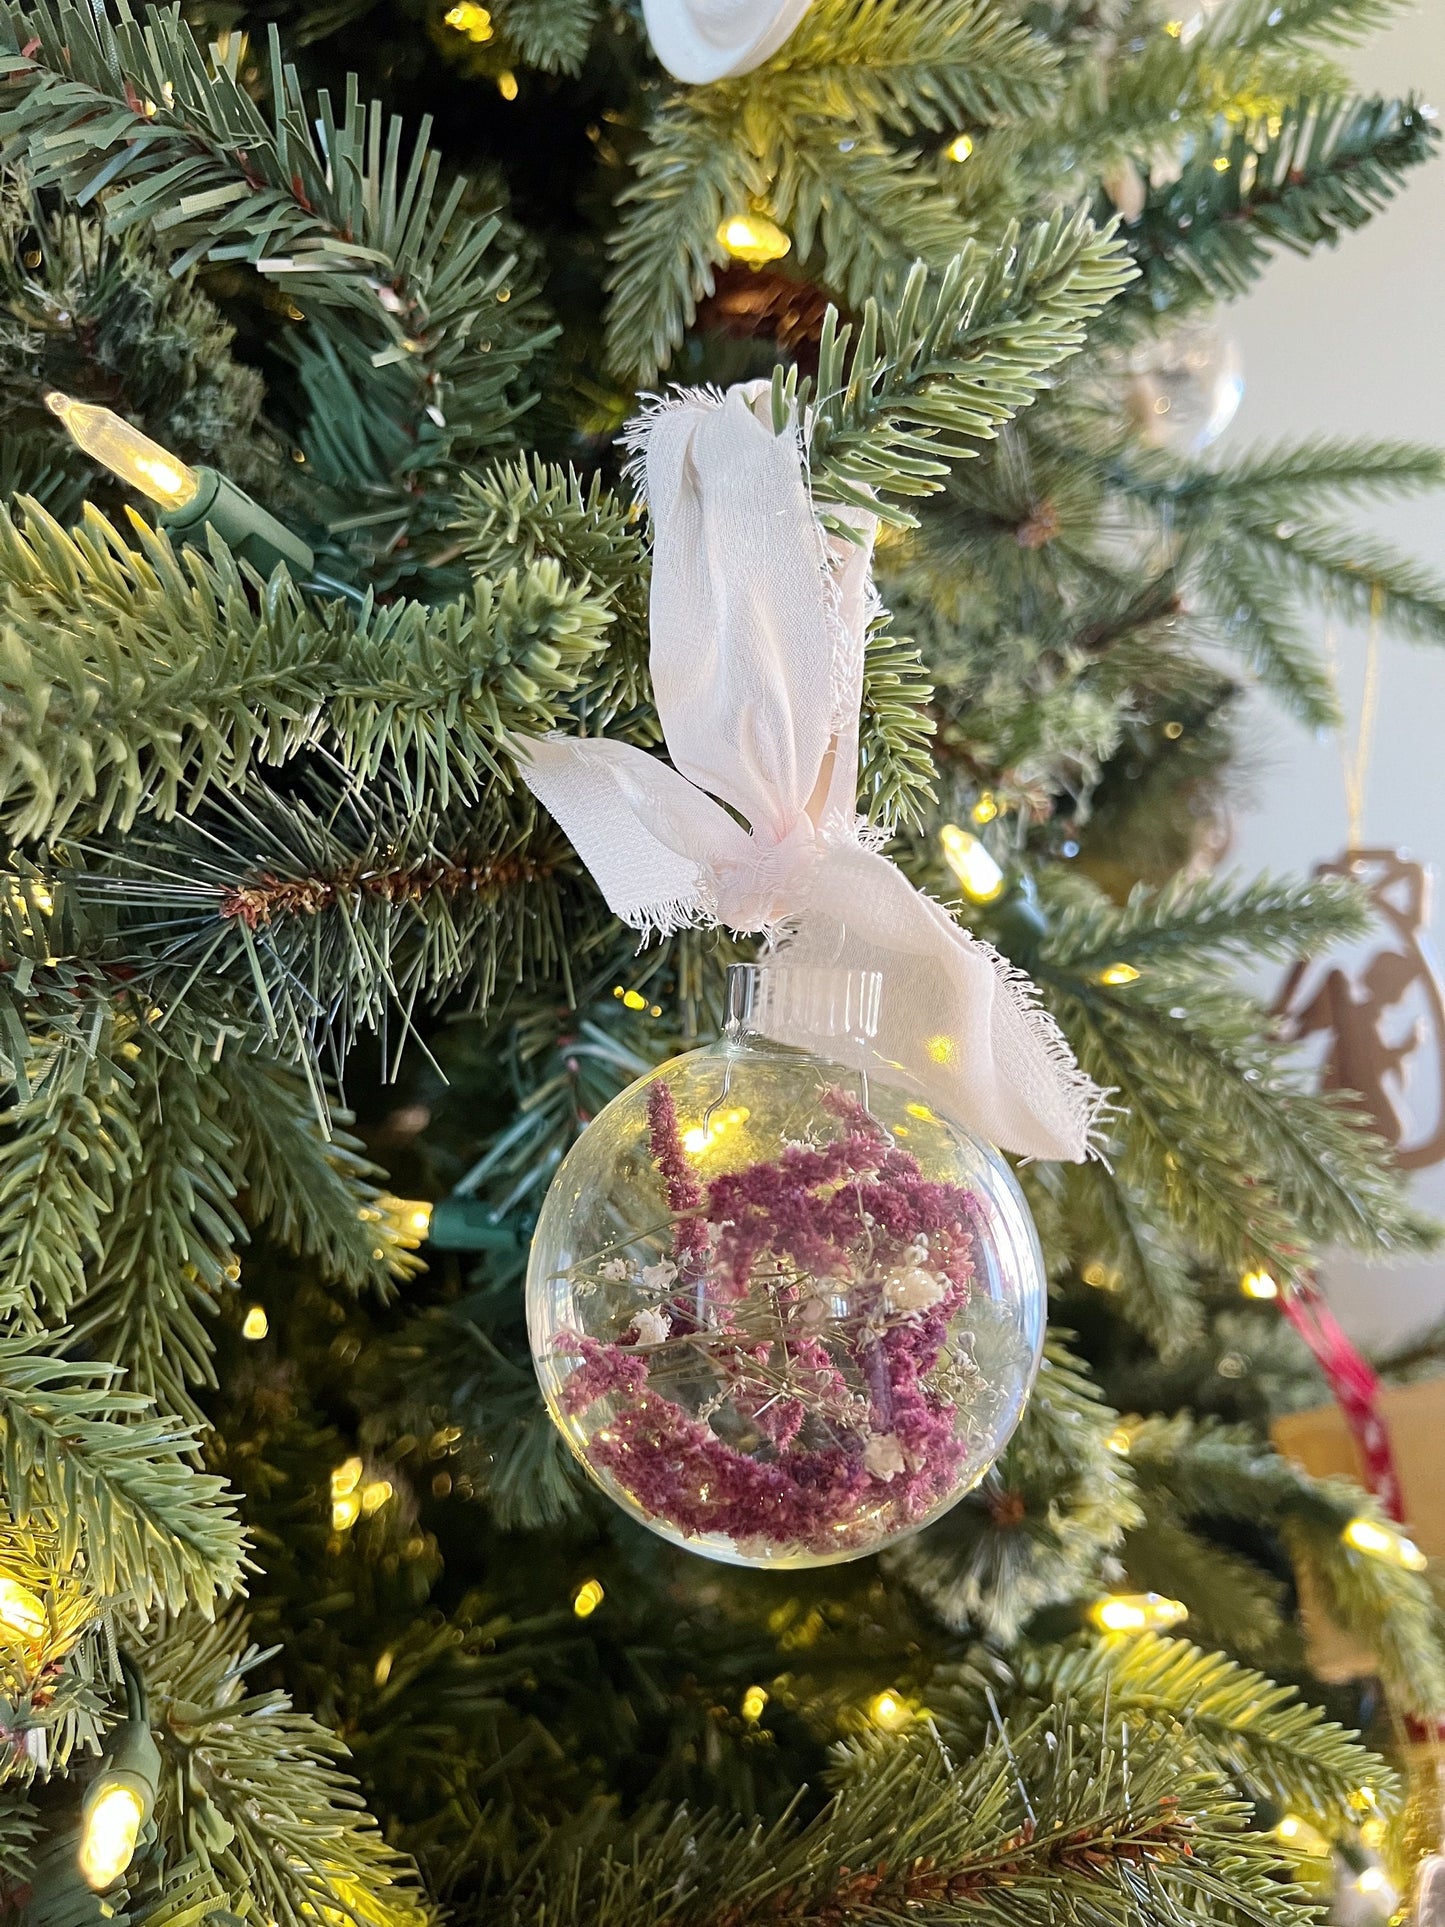 Pack of 4 Christmas Glass Floral Ornaments, Holiday Gifts, Christmas Tree, Room Decor, Dried Flowers, Preserved, Colorful, Natural Authentic